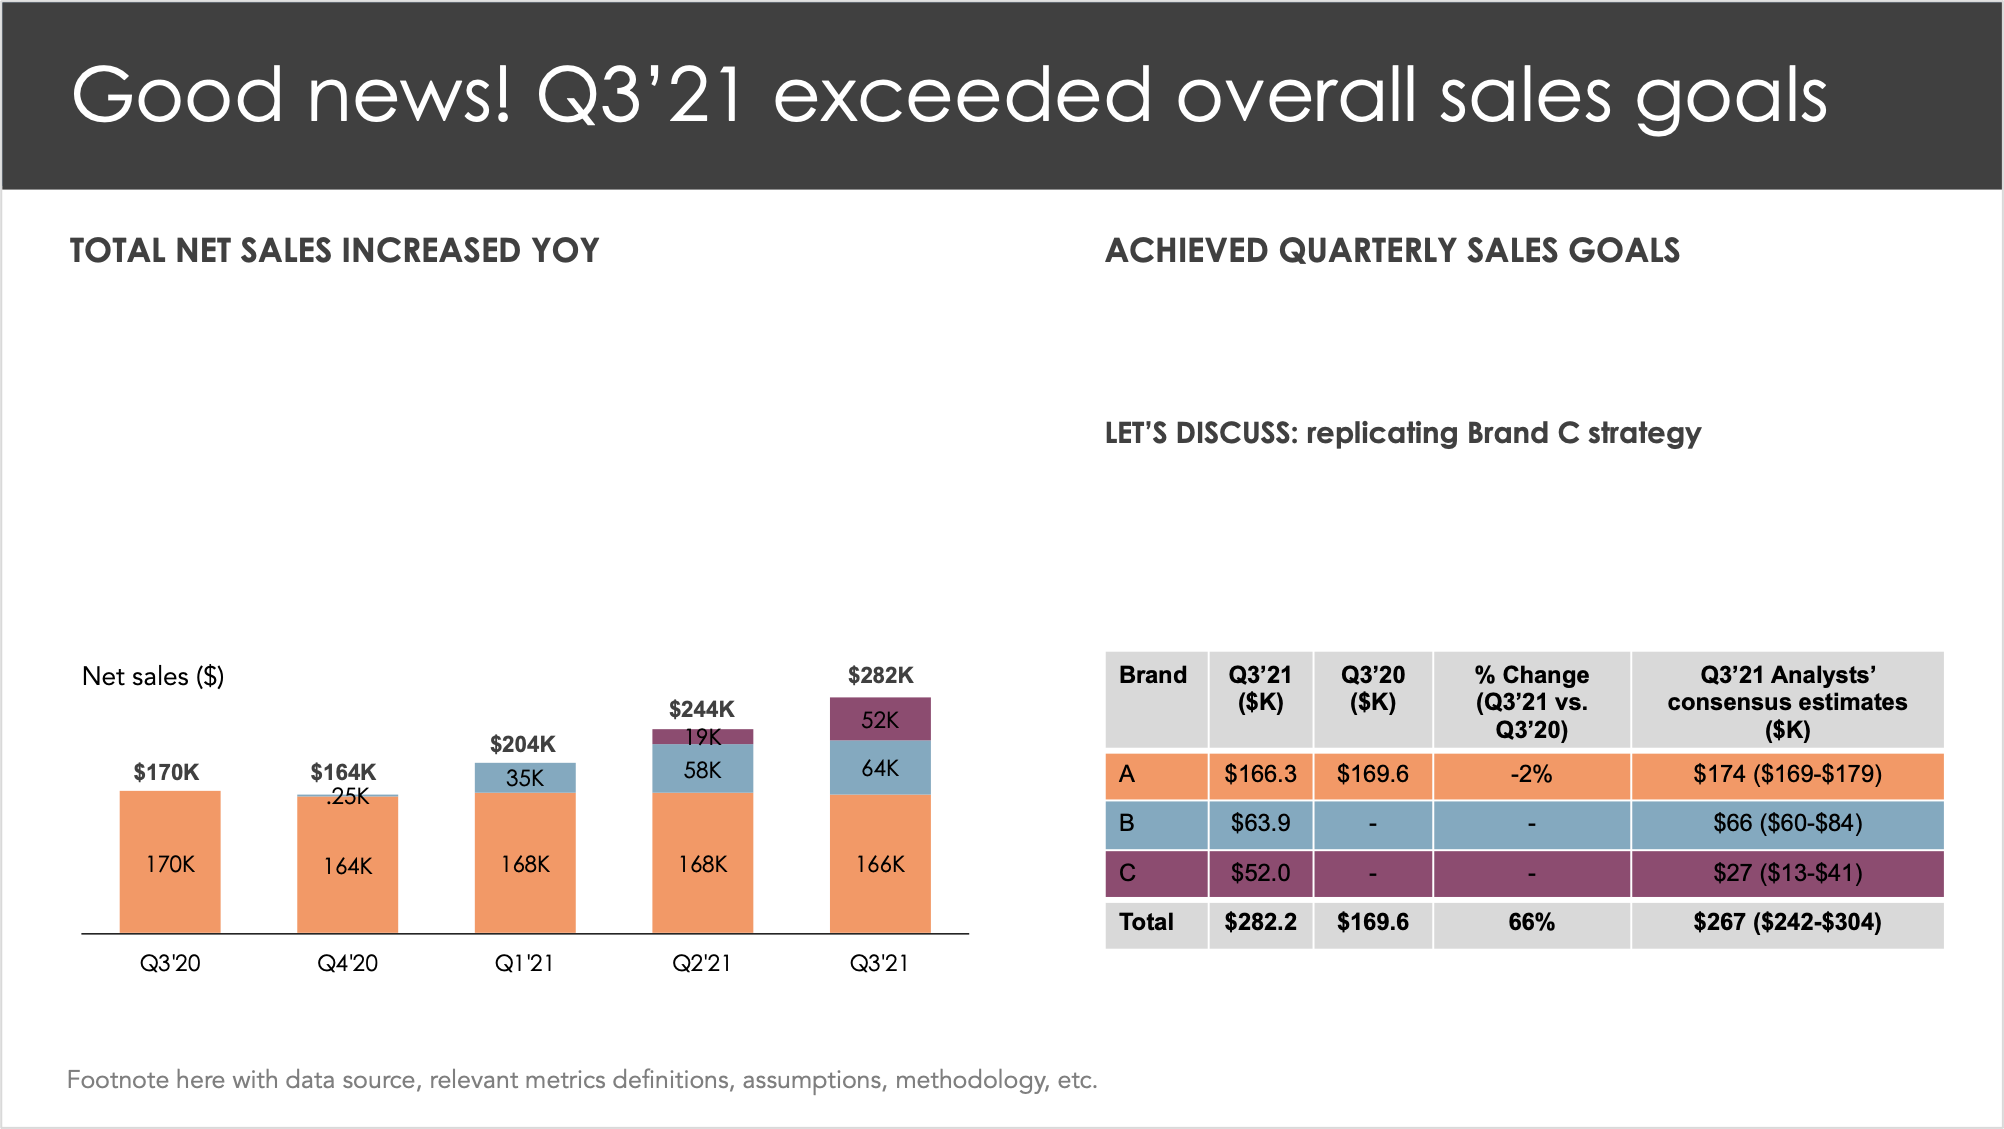 Updated slide to include a new side-by-side layout. The left section is for analysis and data regarding the annual sales growth, while the right section dives deeper into the quarterly performance.